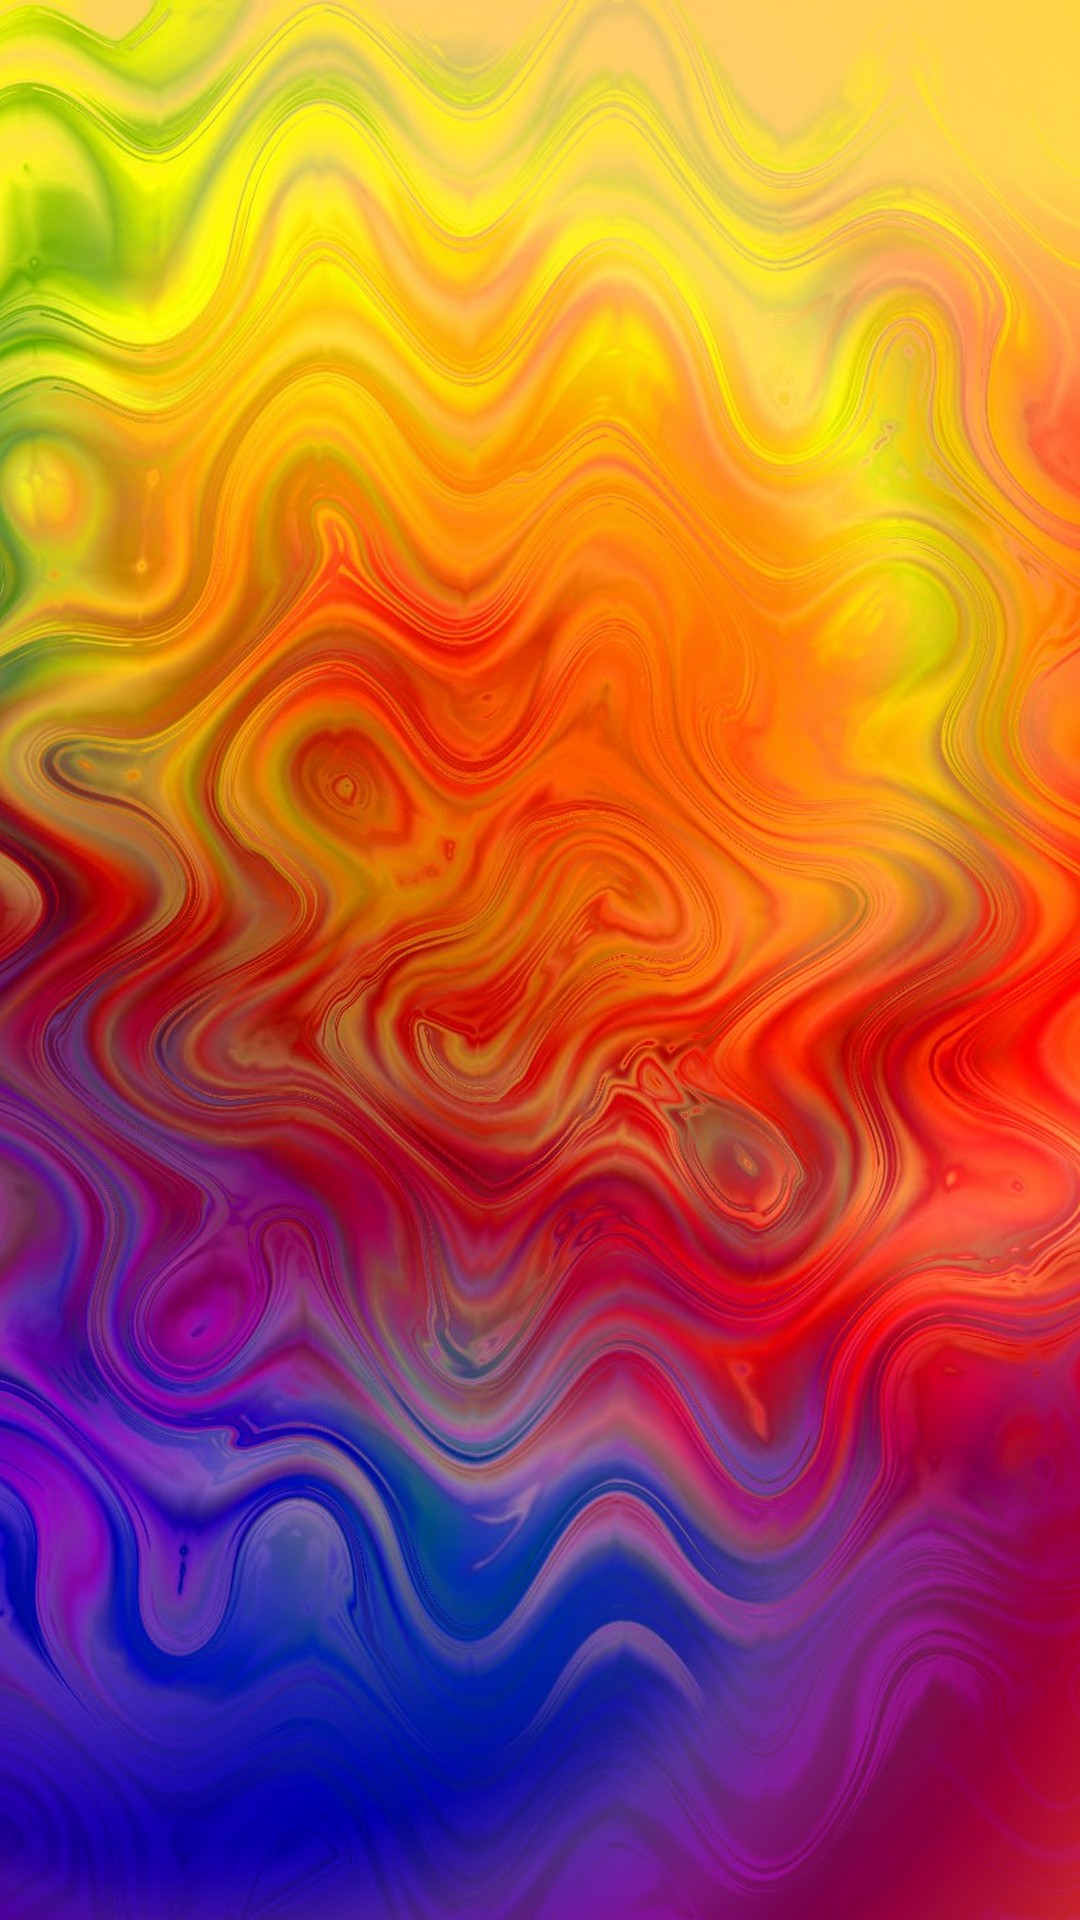 Psychedelic Art Wallpaper For iPhone with HD Resolution 1080X1920